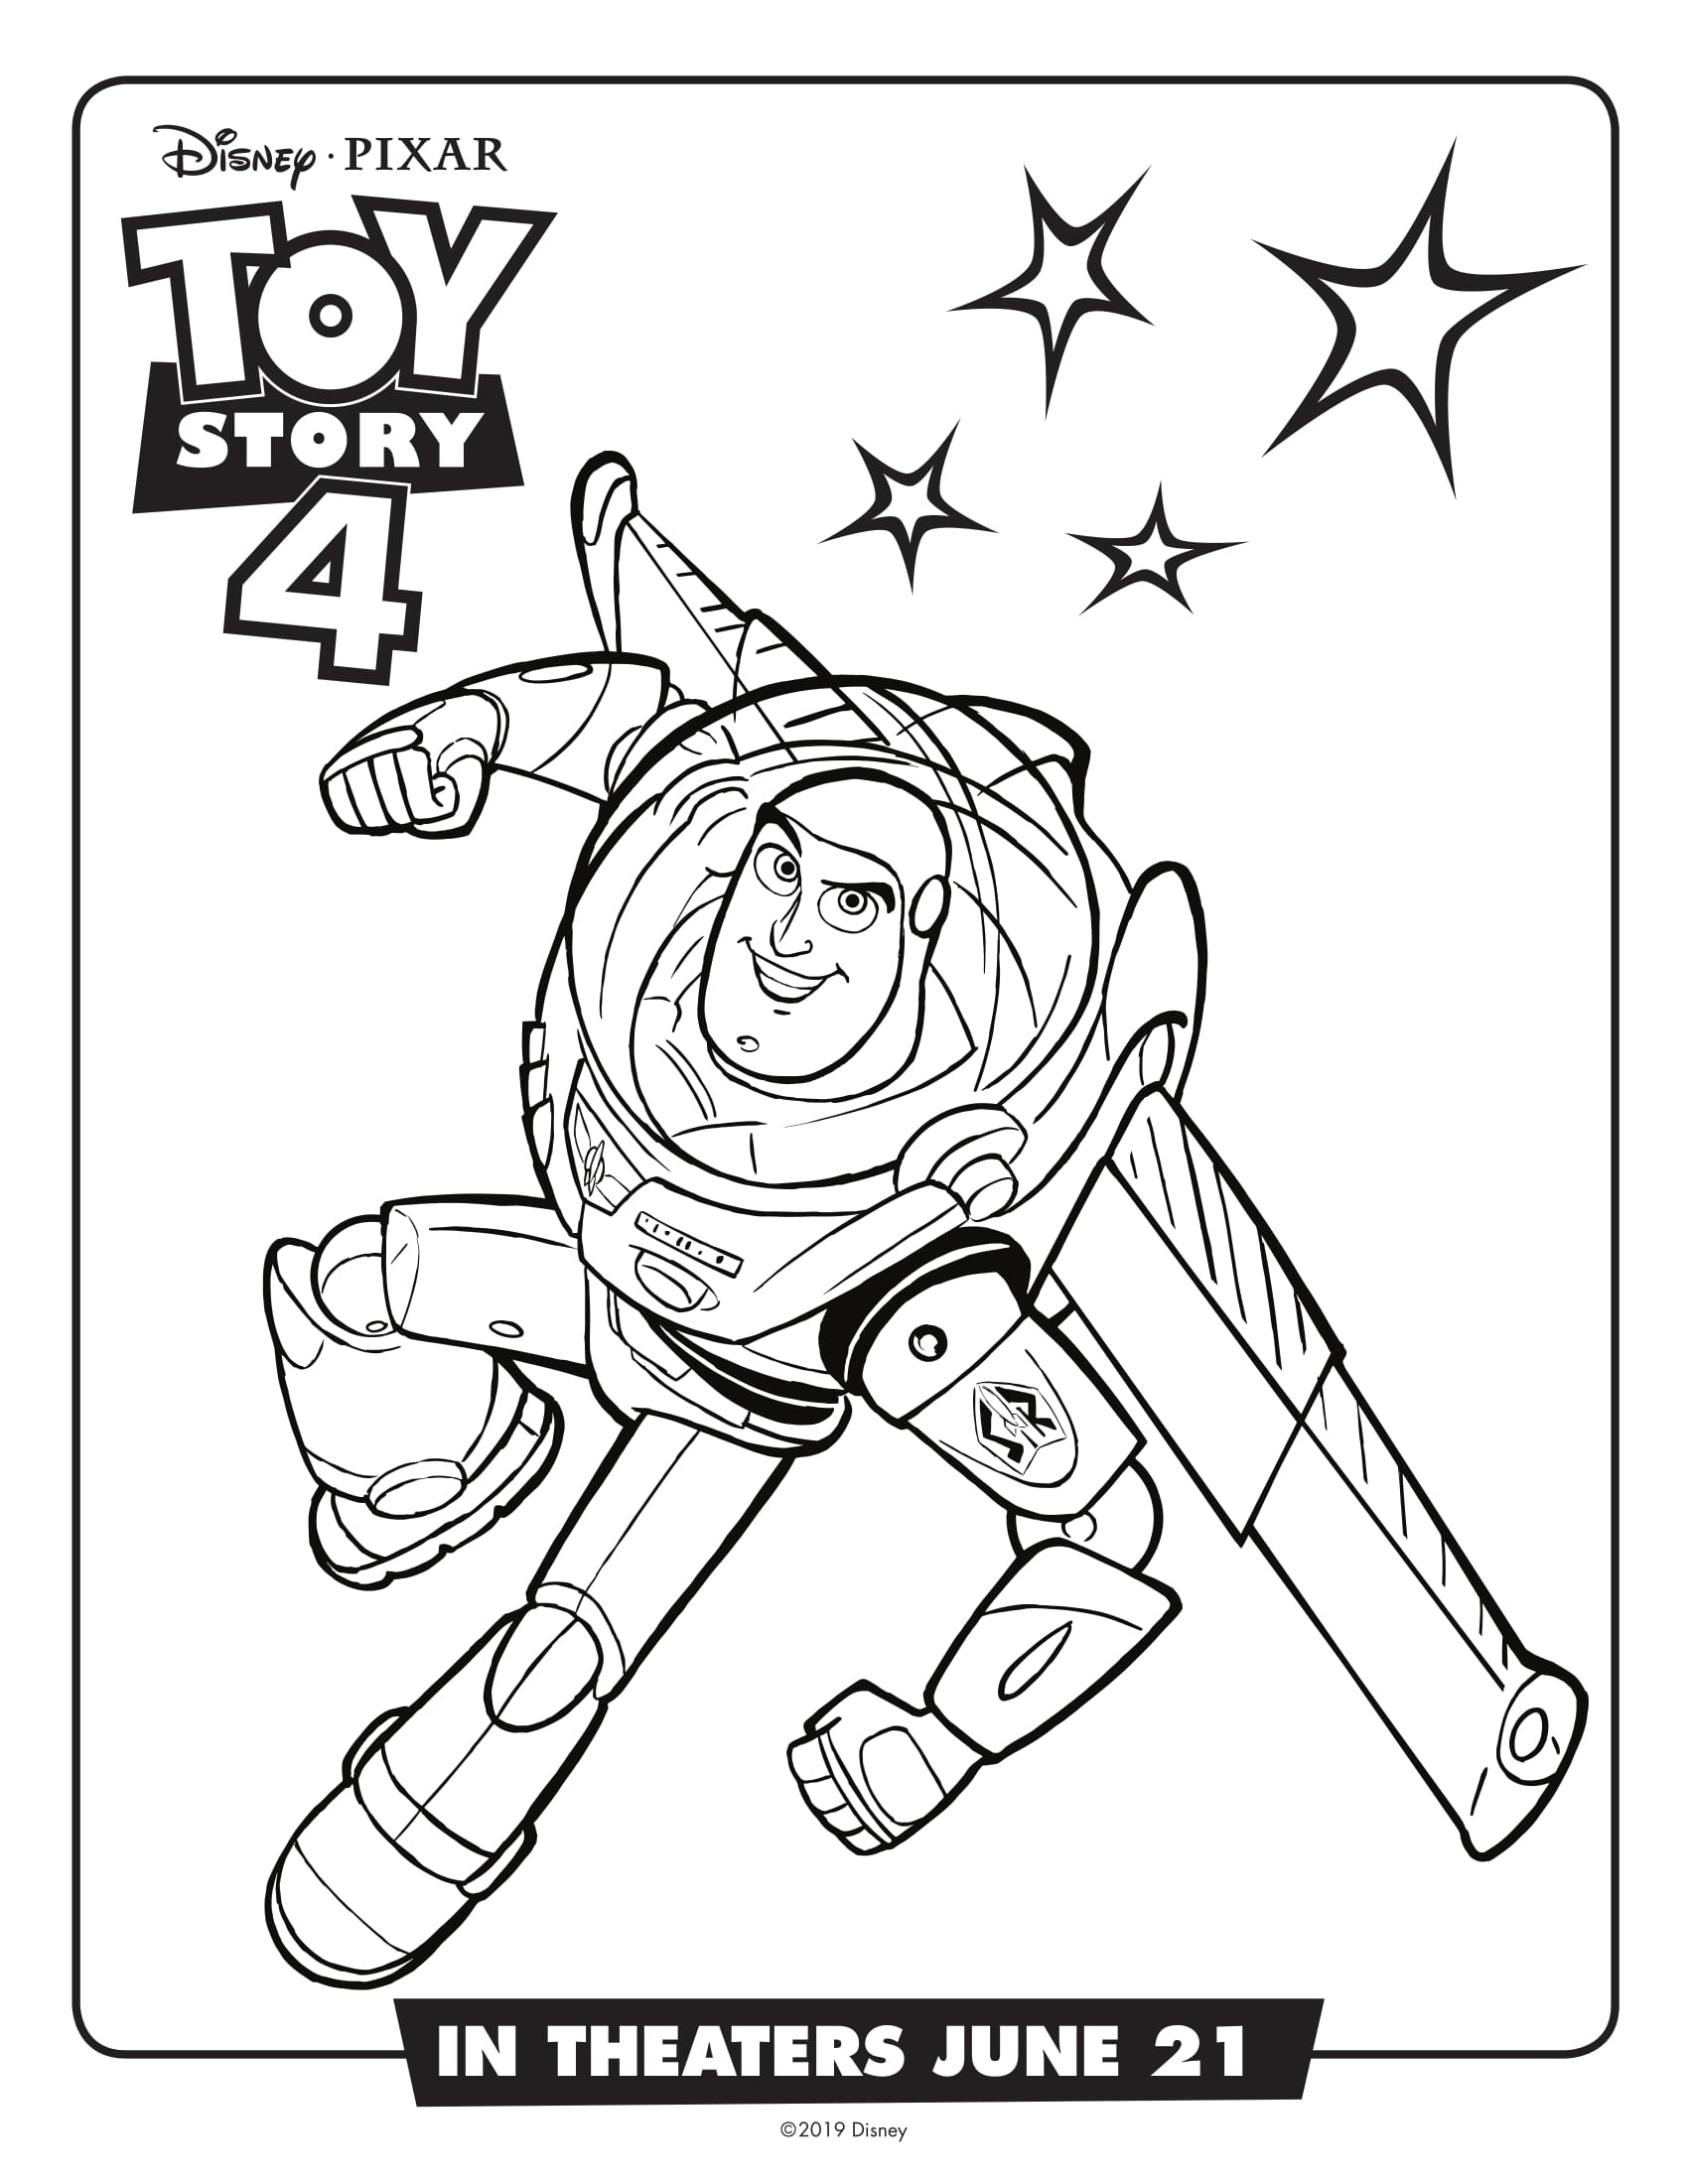 Toy Story 4 Coloring Page Toy story 4 characters coloring pages or coloring sheets! free printables!